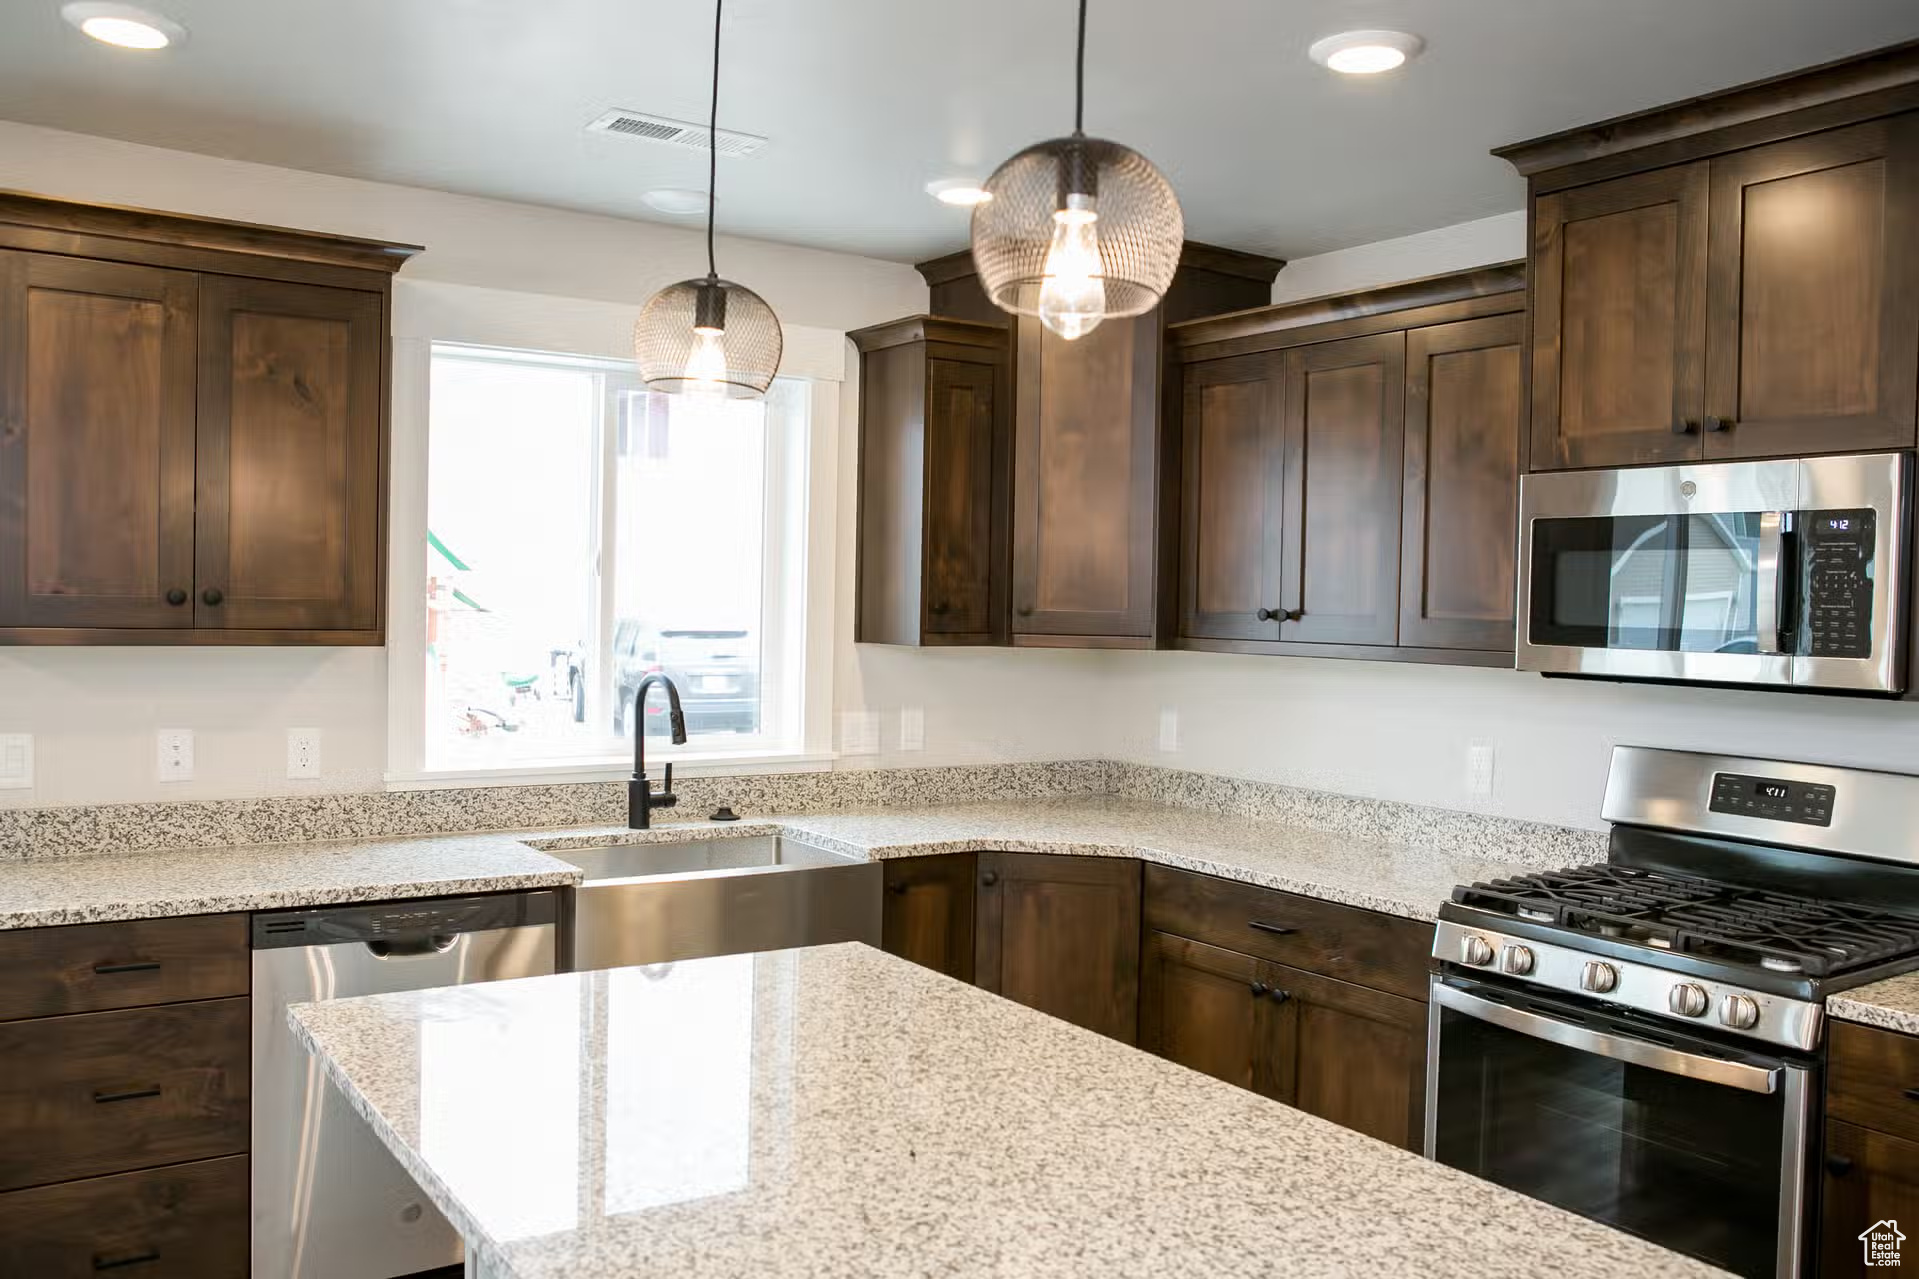 Kitchen featuring appliances with stainless steel finishes, pendant lighting, sink, dark brown cabinets, and light stone countertops